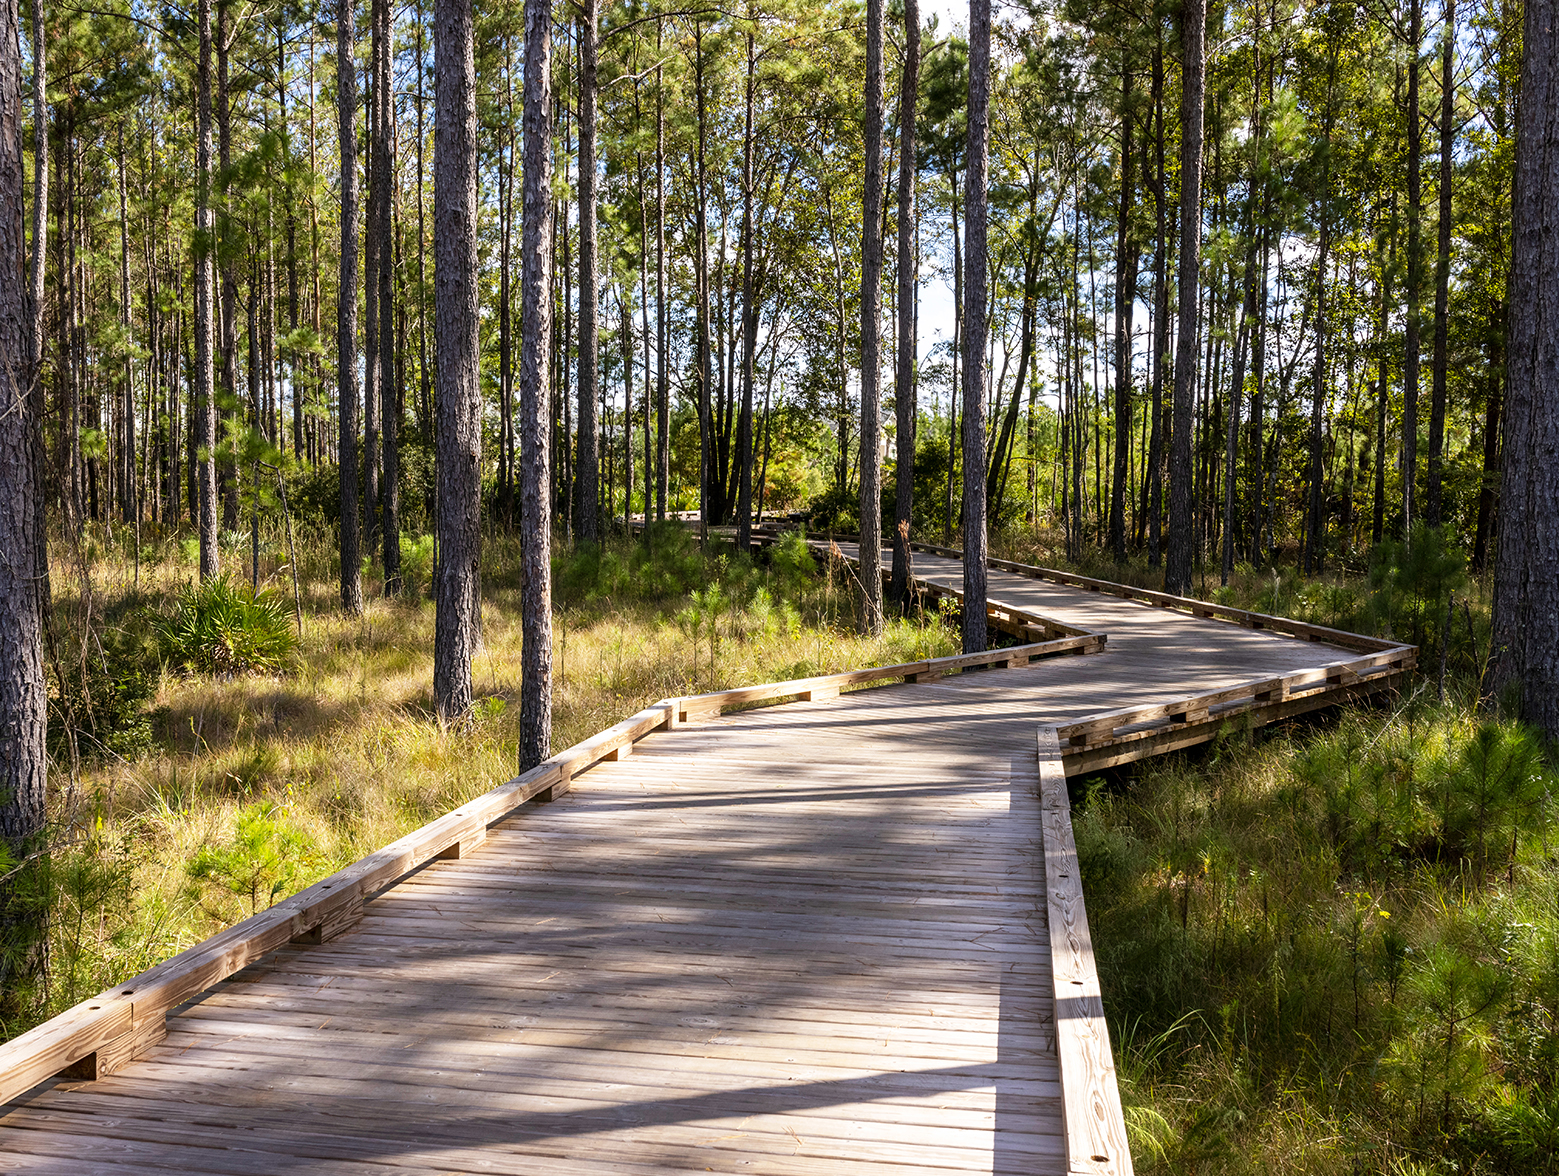 Picture of boardwalk going through nature area at Wildlight.